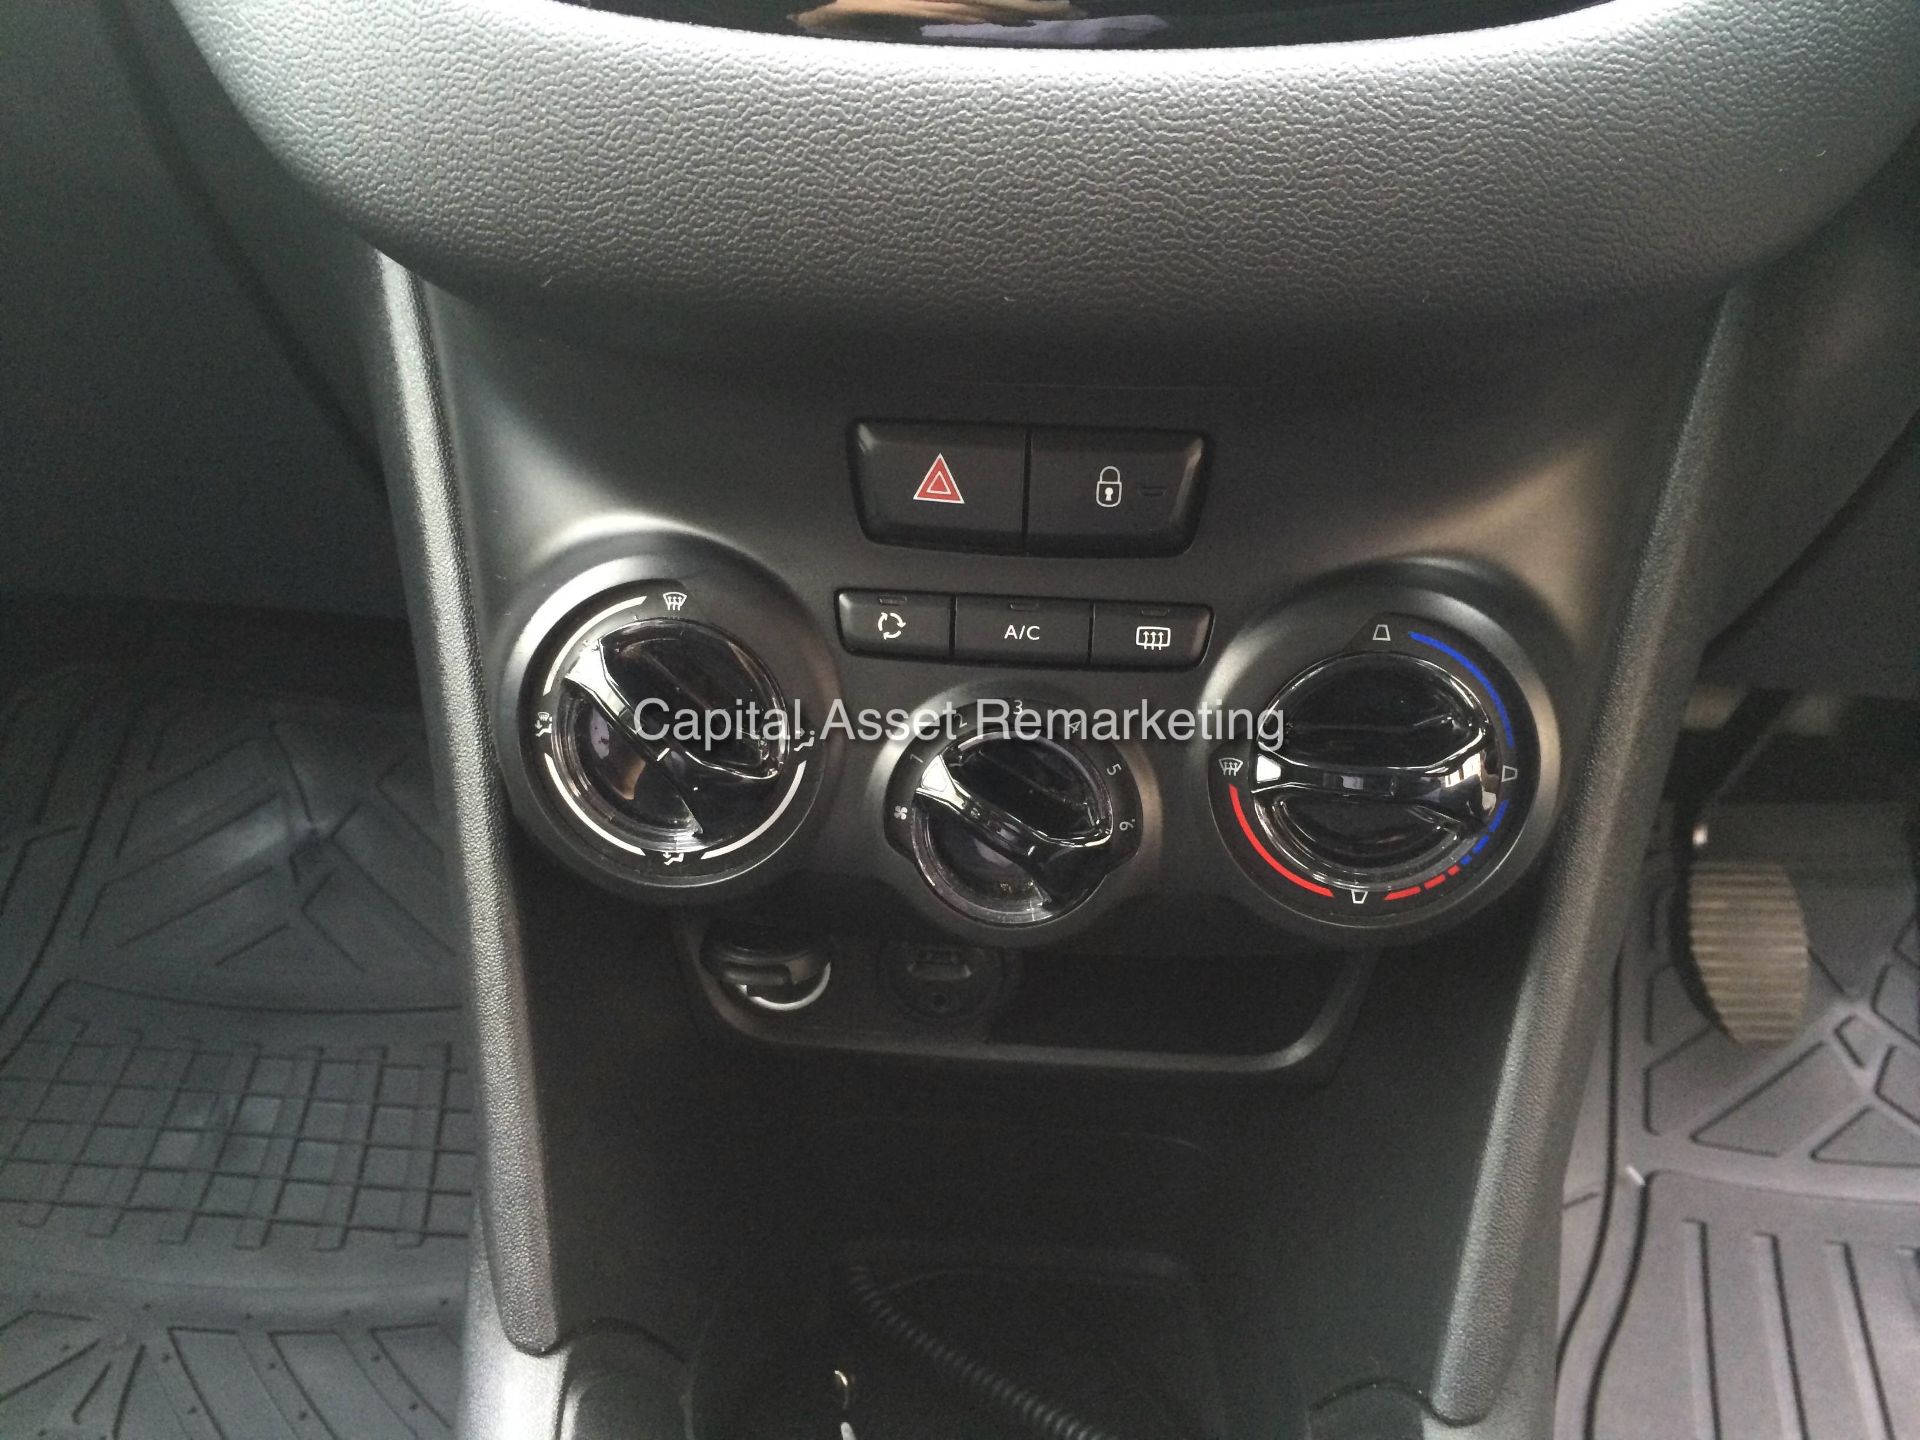 PEUGEOT 208 1.4 HDI 'ACTIVE' 5 DOOR (2014 - 14 REG)  **OWNED BY PEUGEOT FROM NEW** - Image 14 of 15